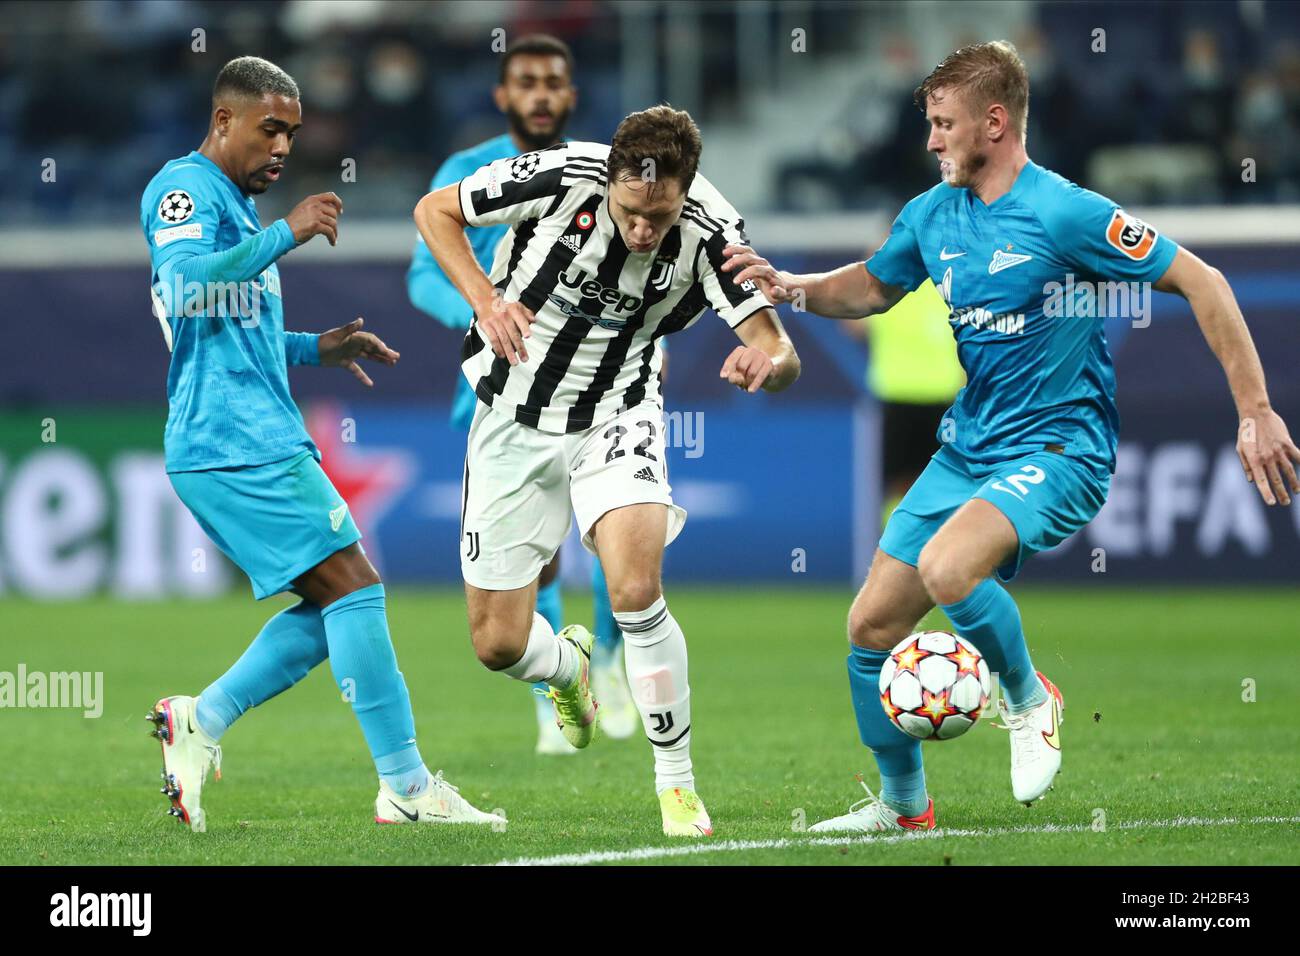 forward Malcom of FC Zeni, midfielder Federico Chiesa of FC Juventus and defnder Dmitri Chistyakov of FC Zenit during UEFA Champions League match FC Zenit v FC Juventus at Gazprom Arena in Saint Petersburg. SAINT PETERSBURG,  - OCTOBER 20: (Photo by Anatoliy Medved) Stock Photo